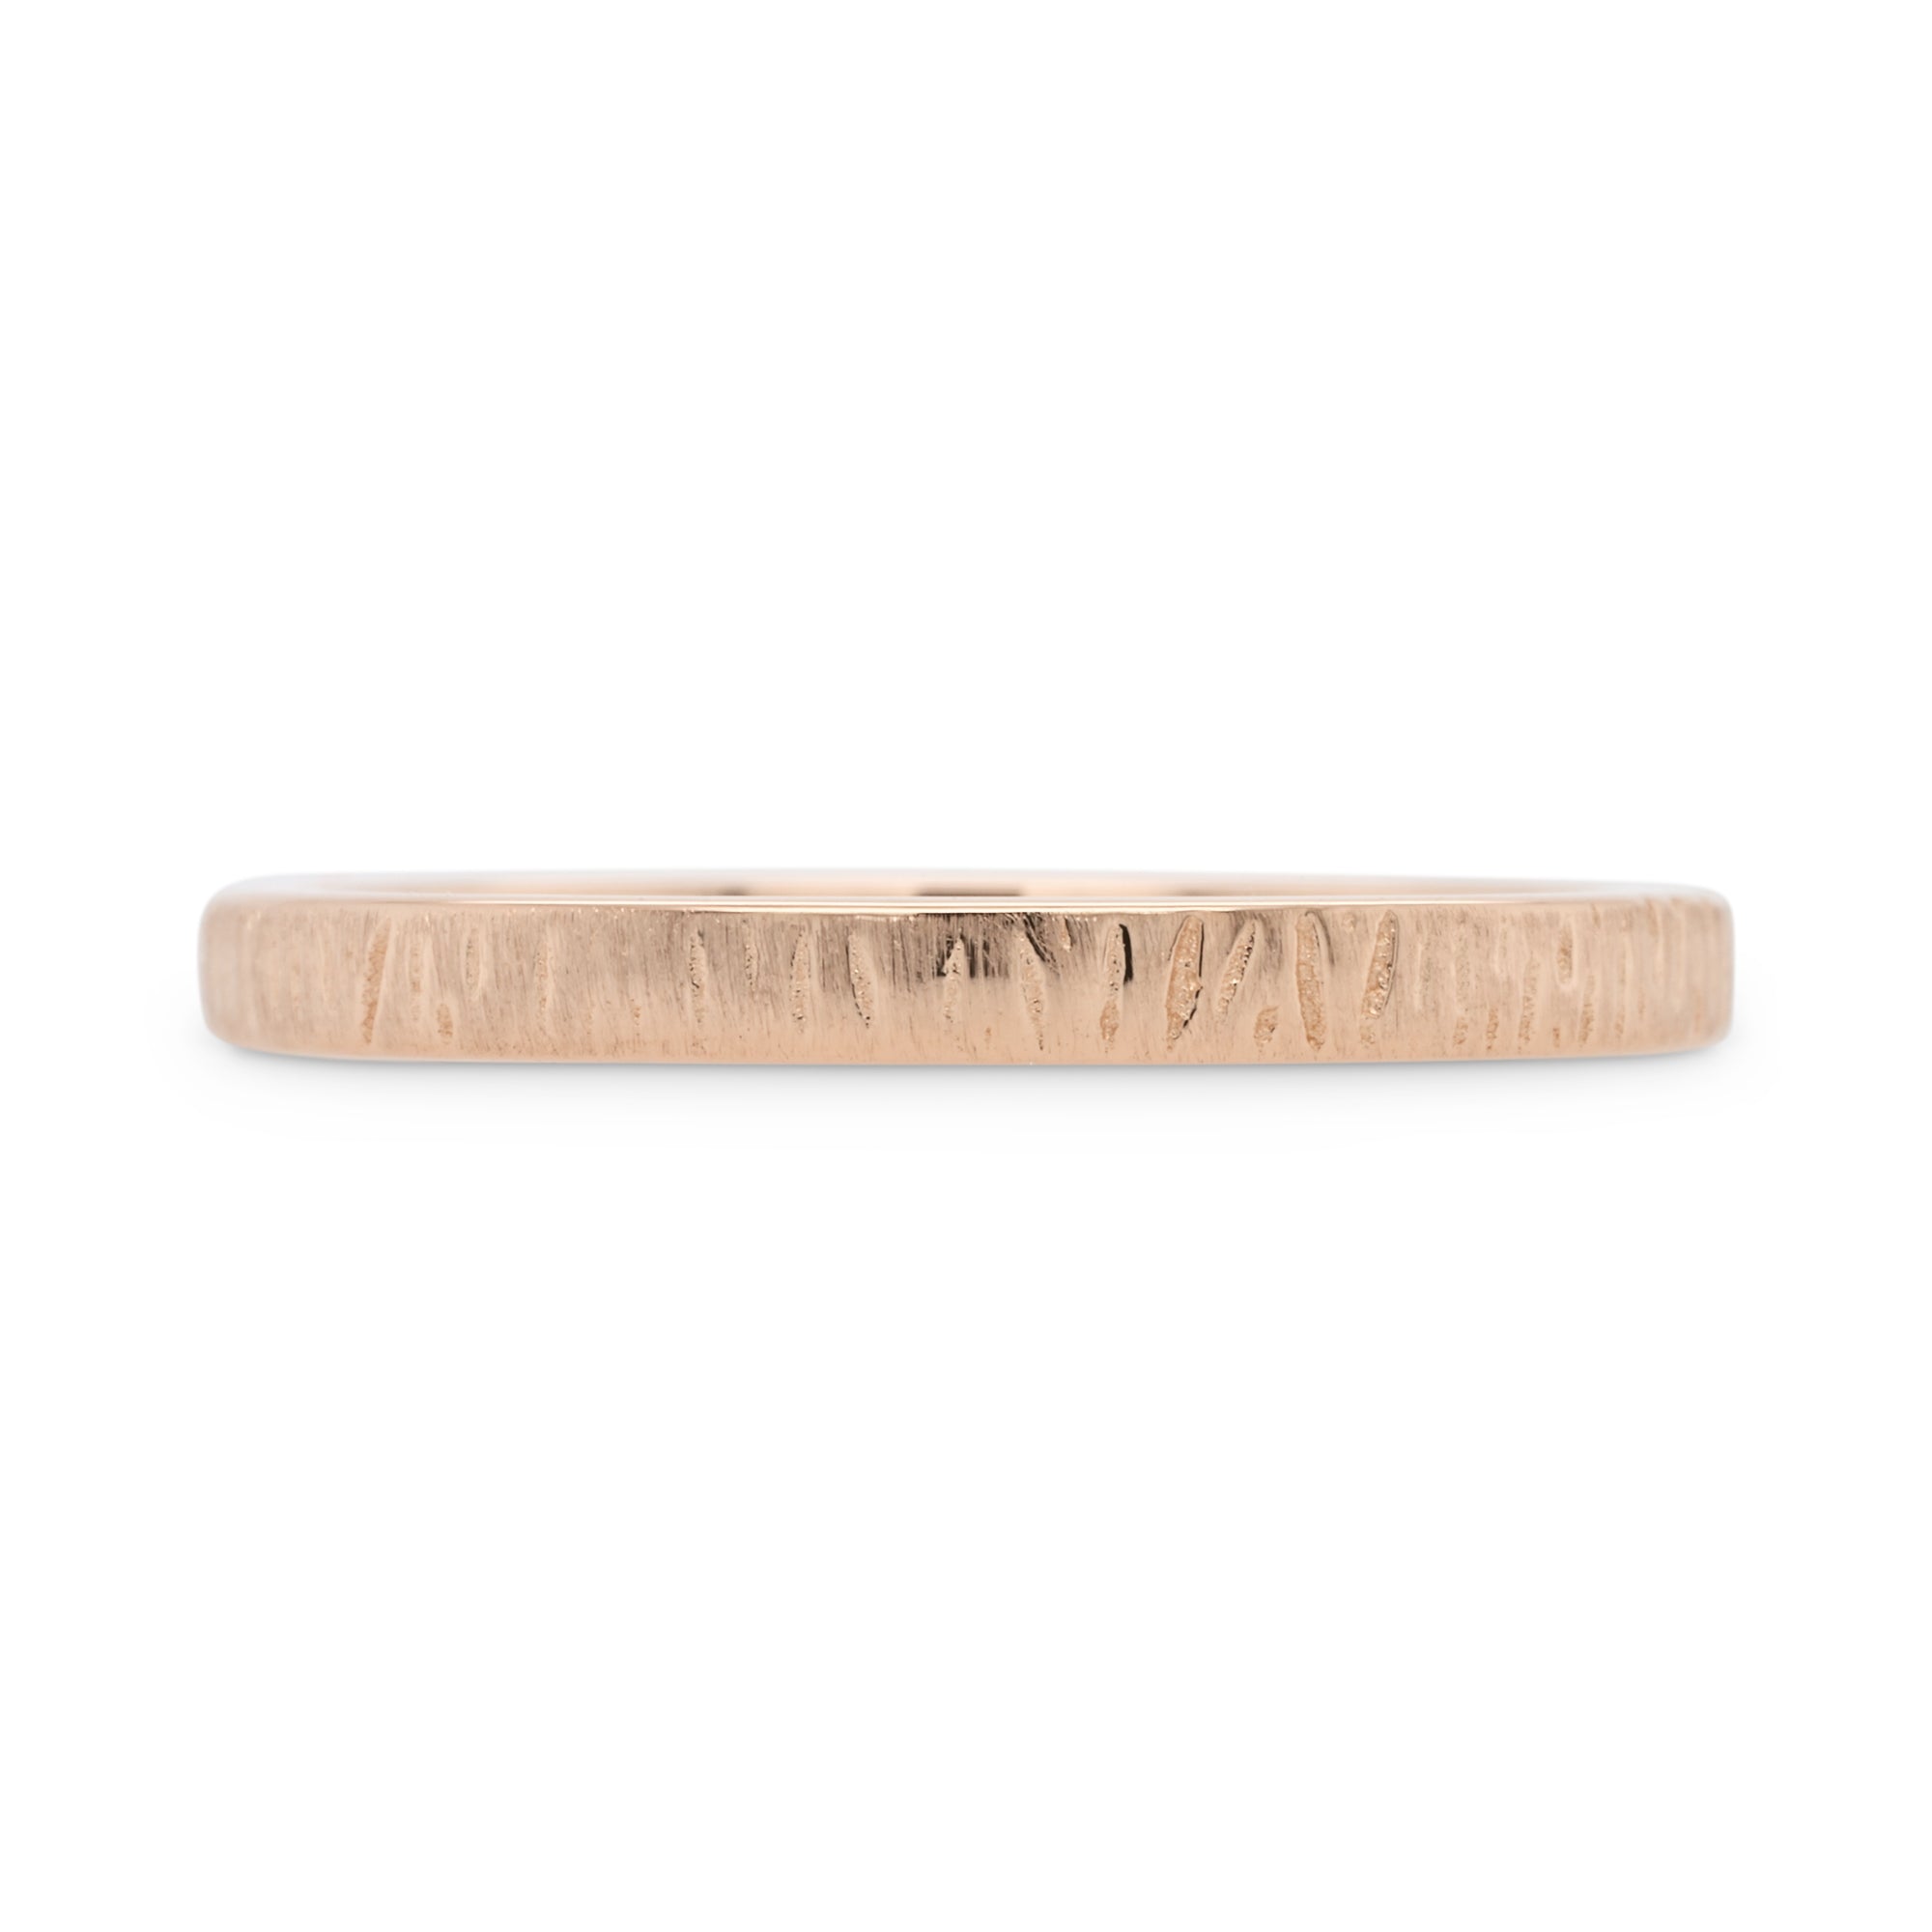 2mm rose gold wedding band with carved woodgrain texture